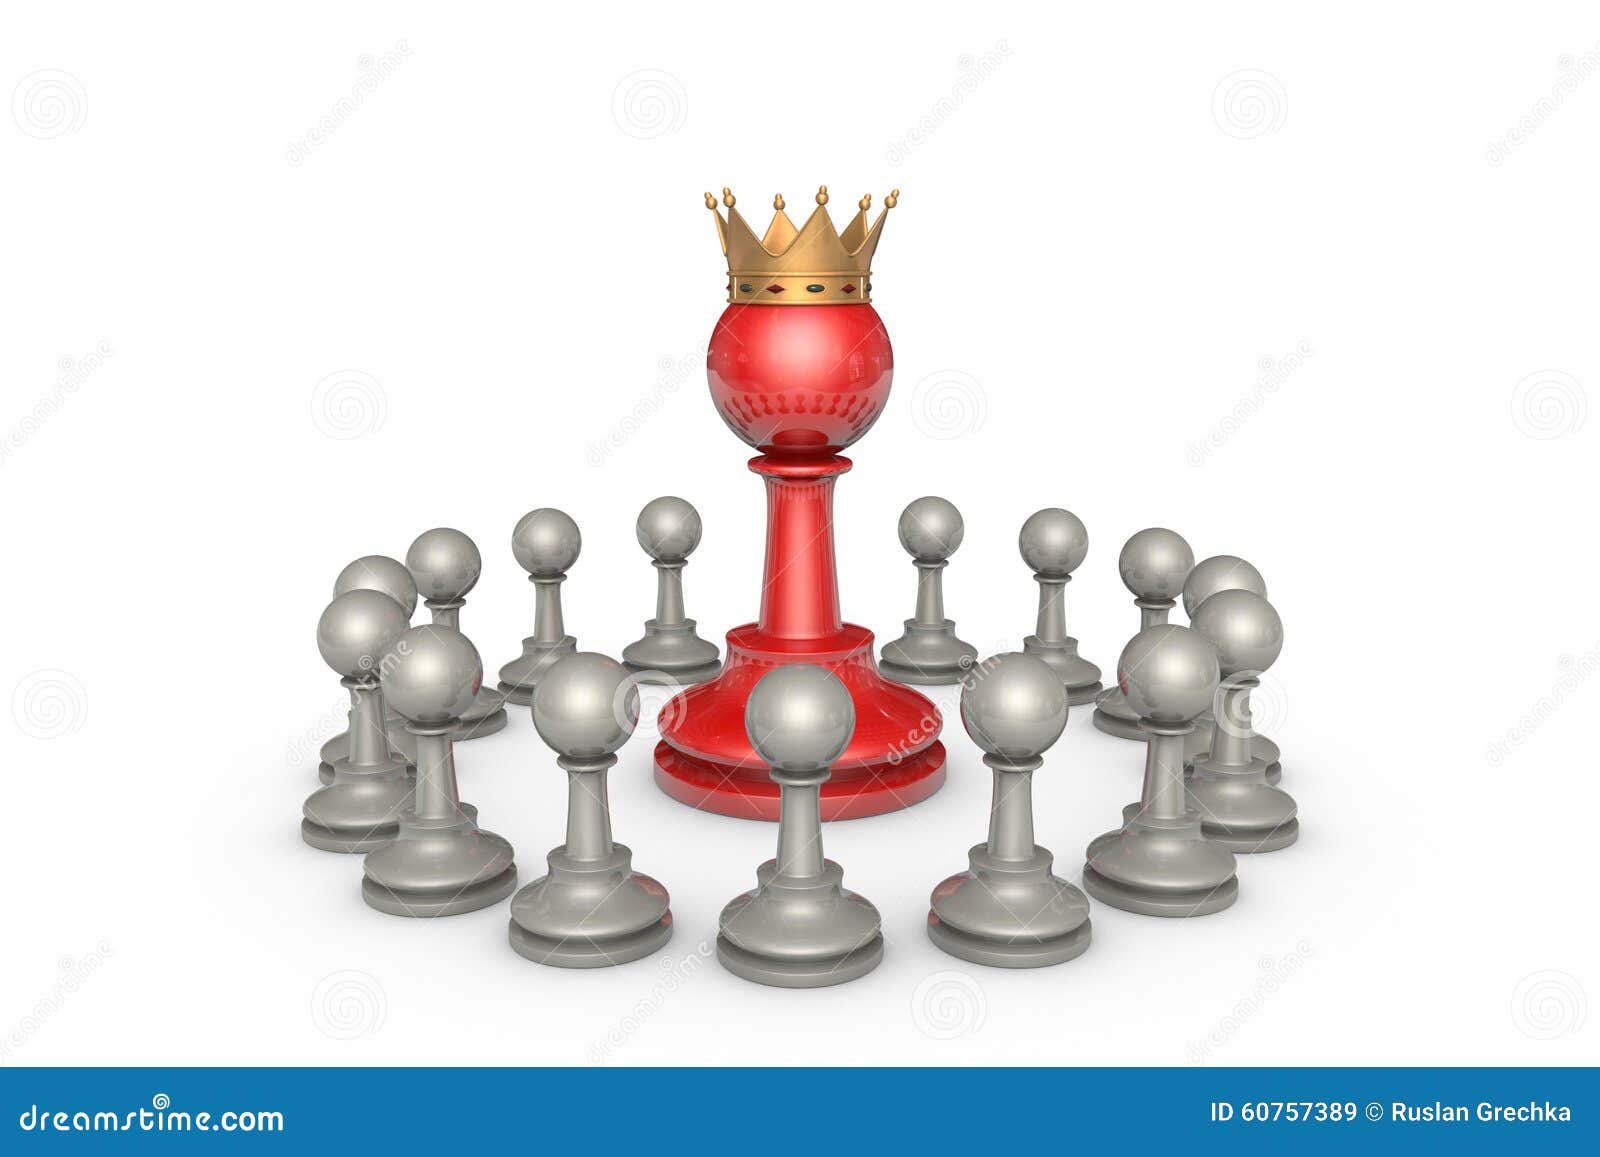 parliamentary elections or the political elite (chess metaphor)